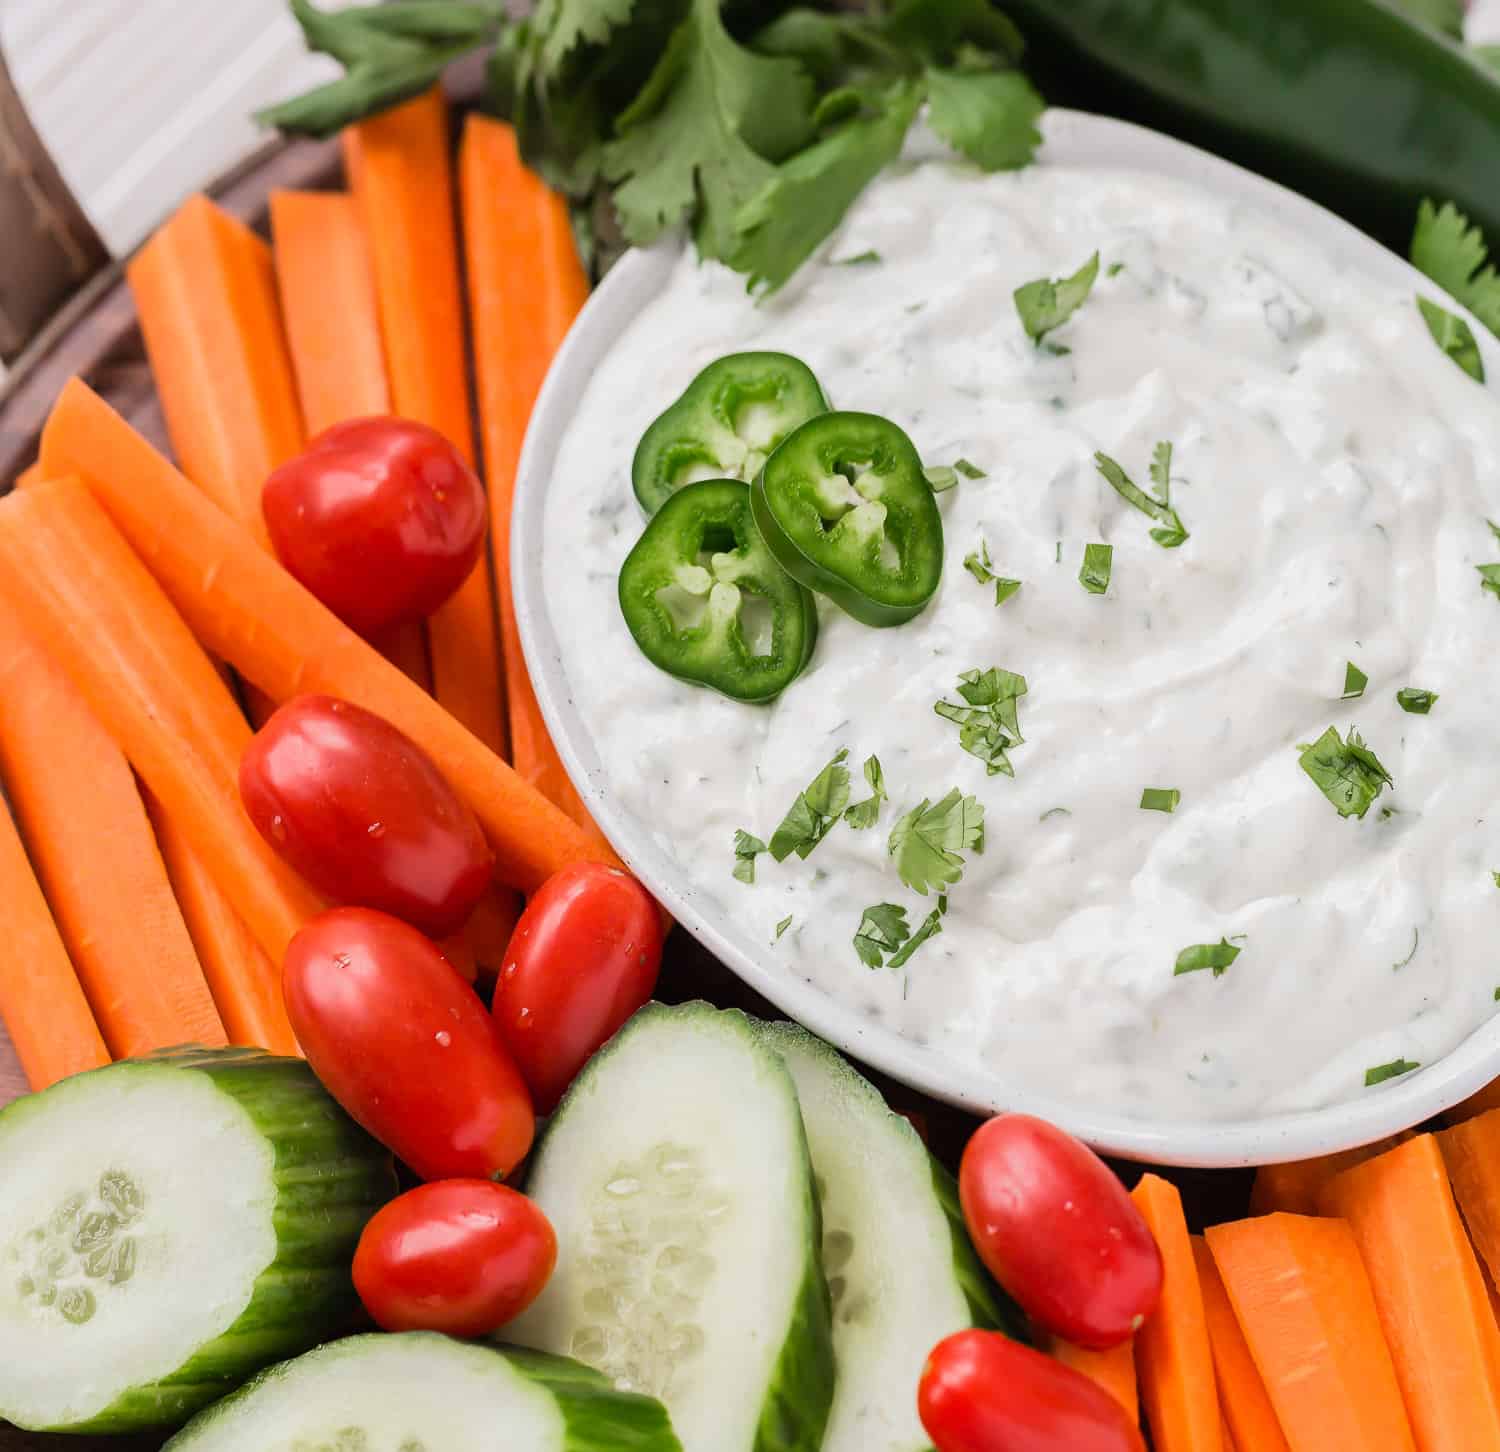 Southwestern ranch dip surrounded by vegetables.